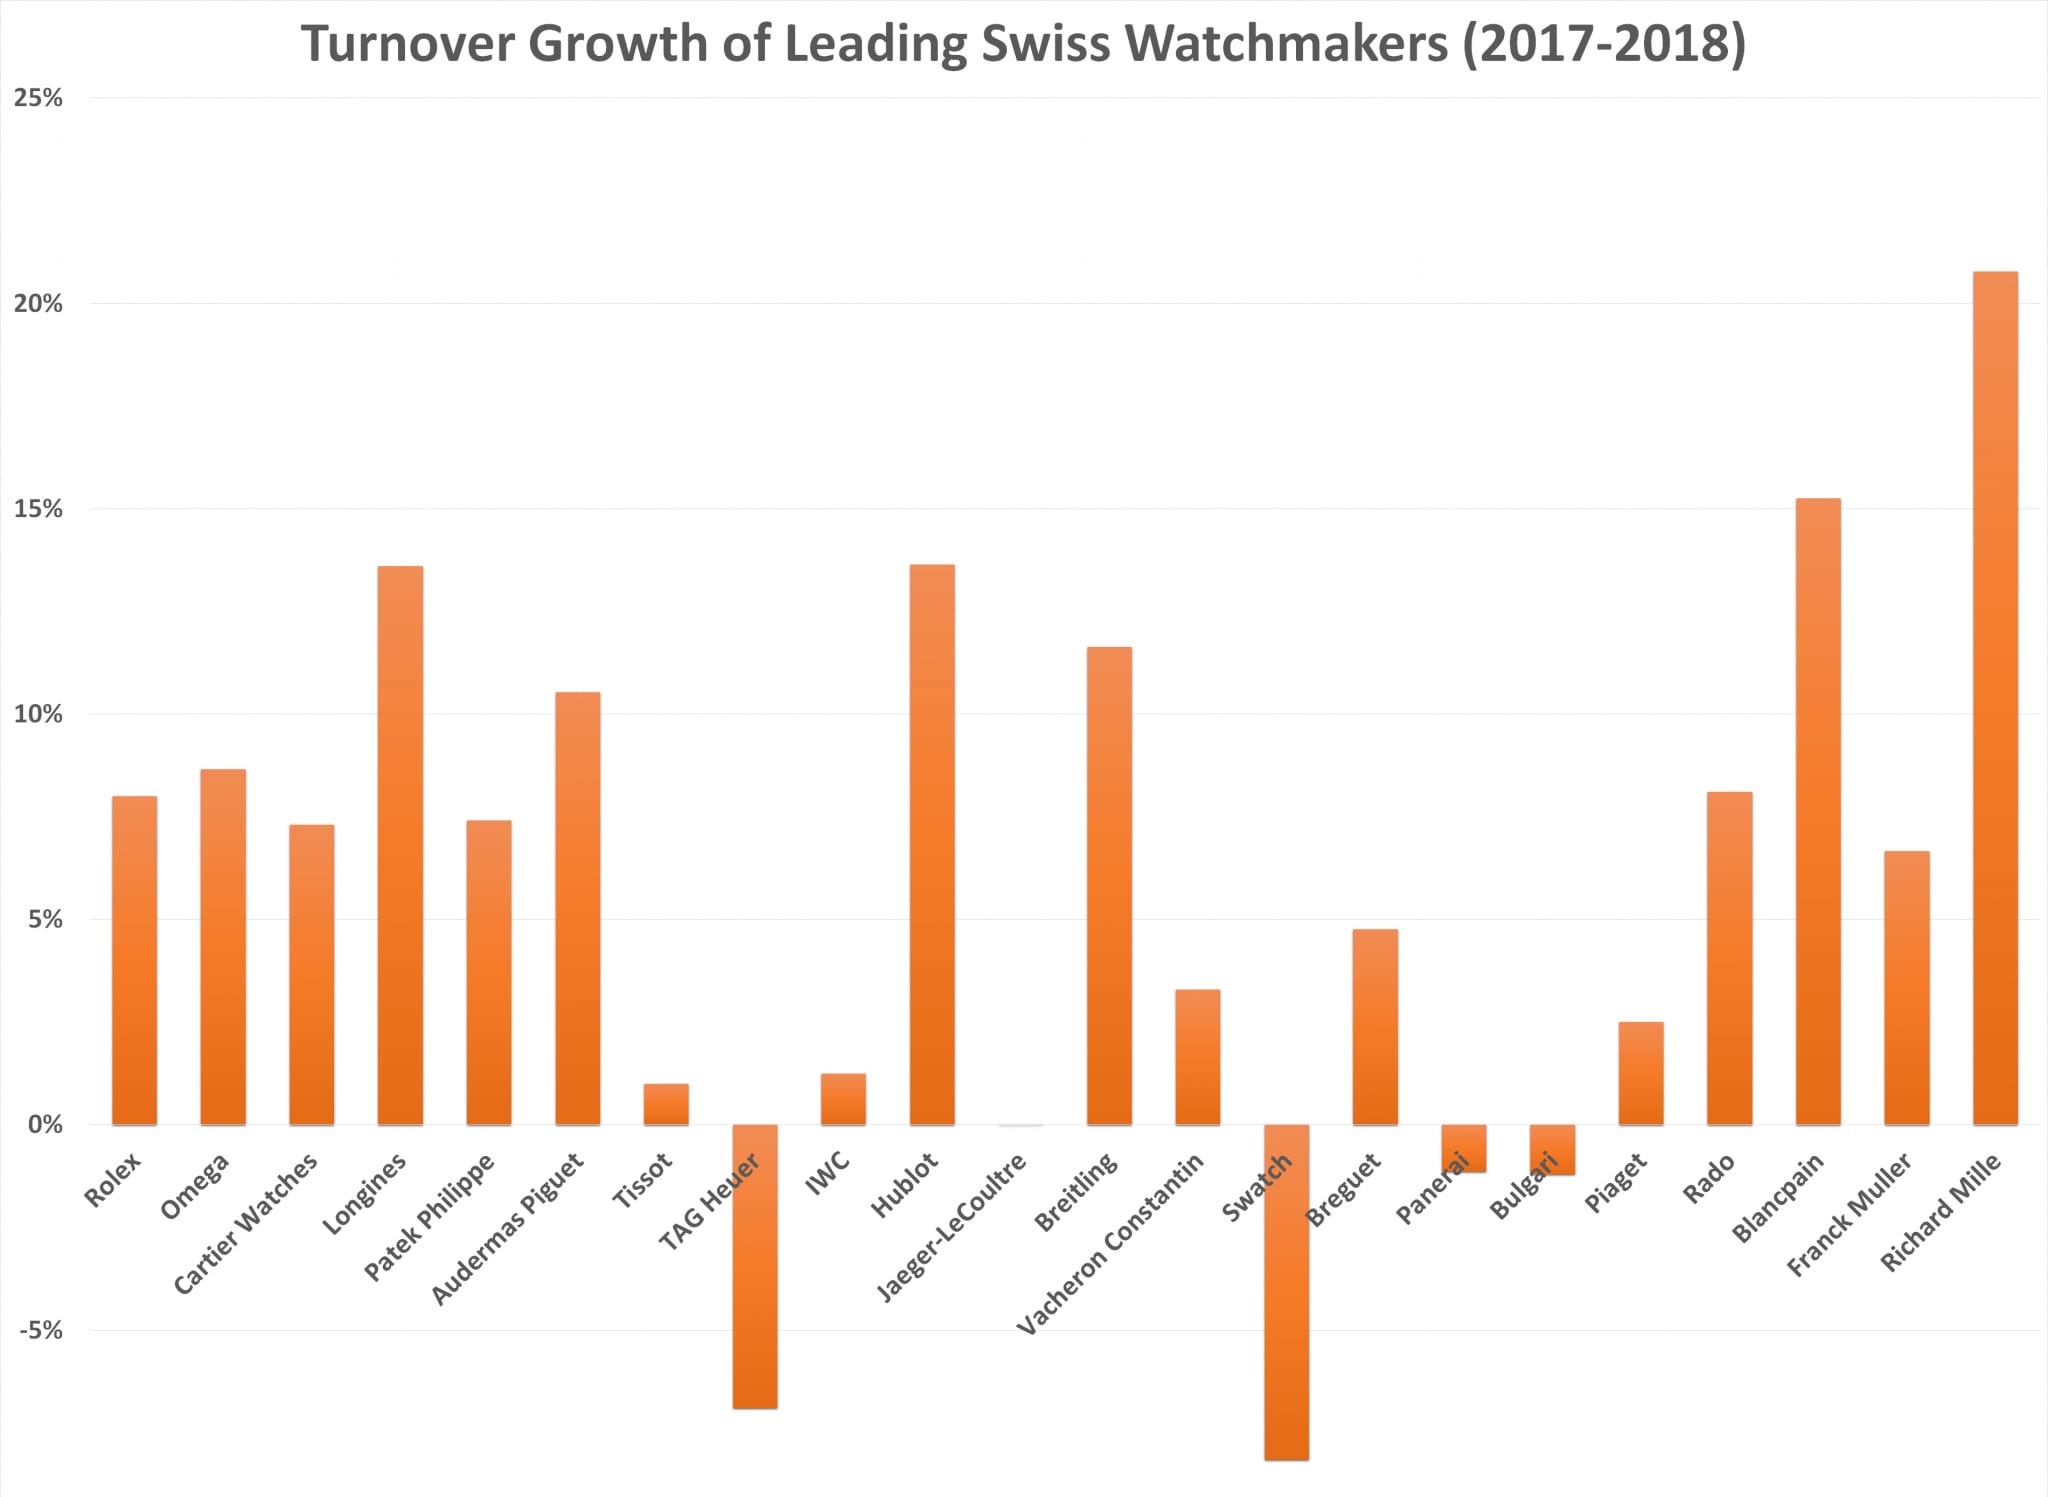 Growth of major watchmakers